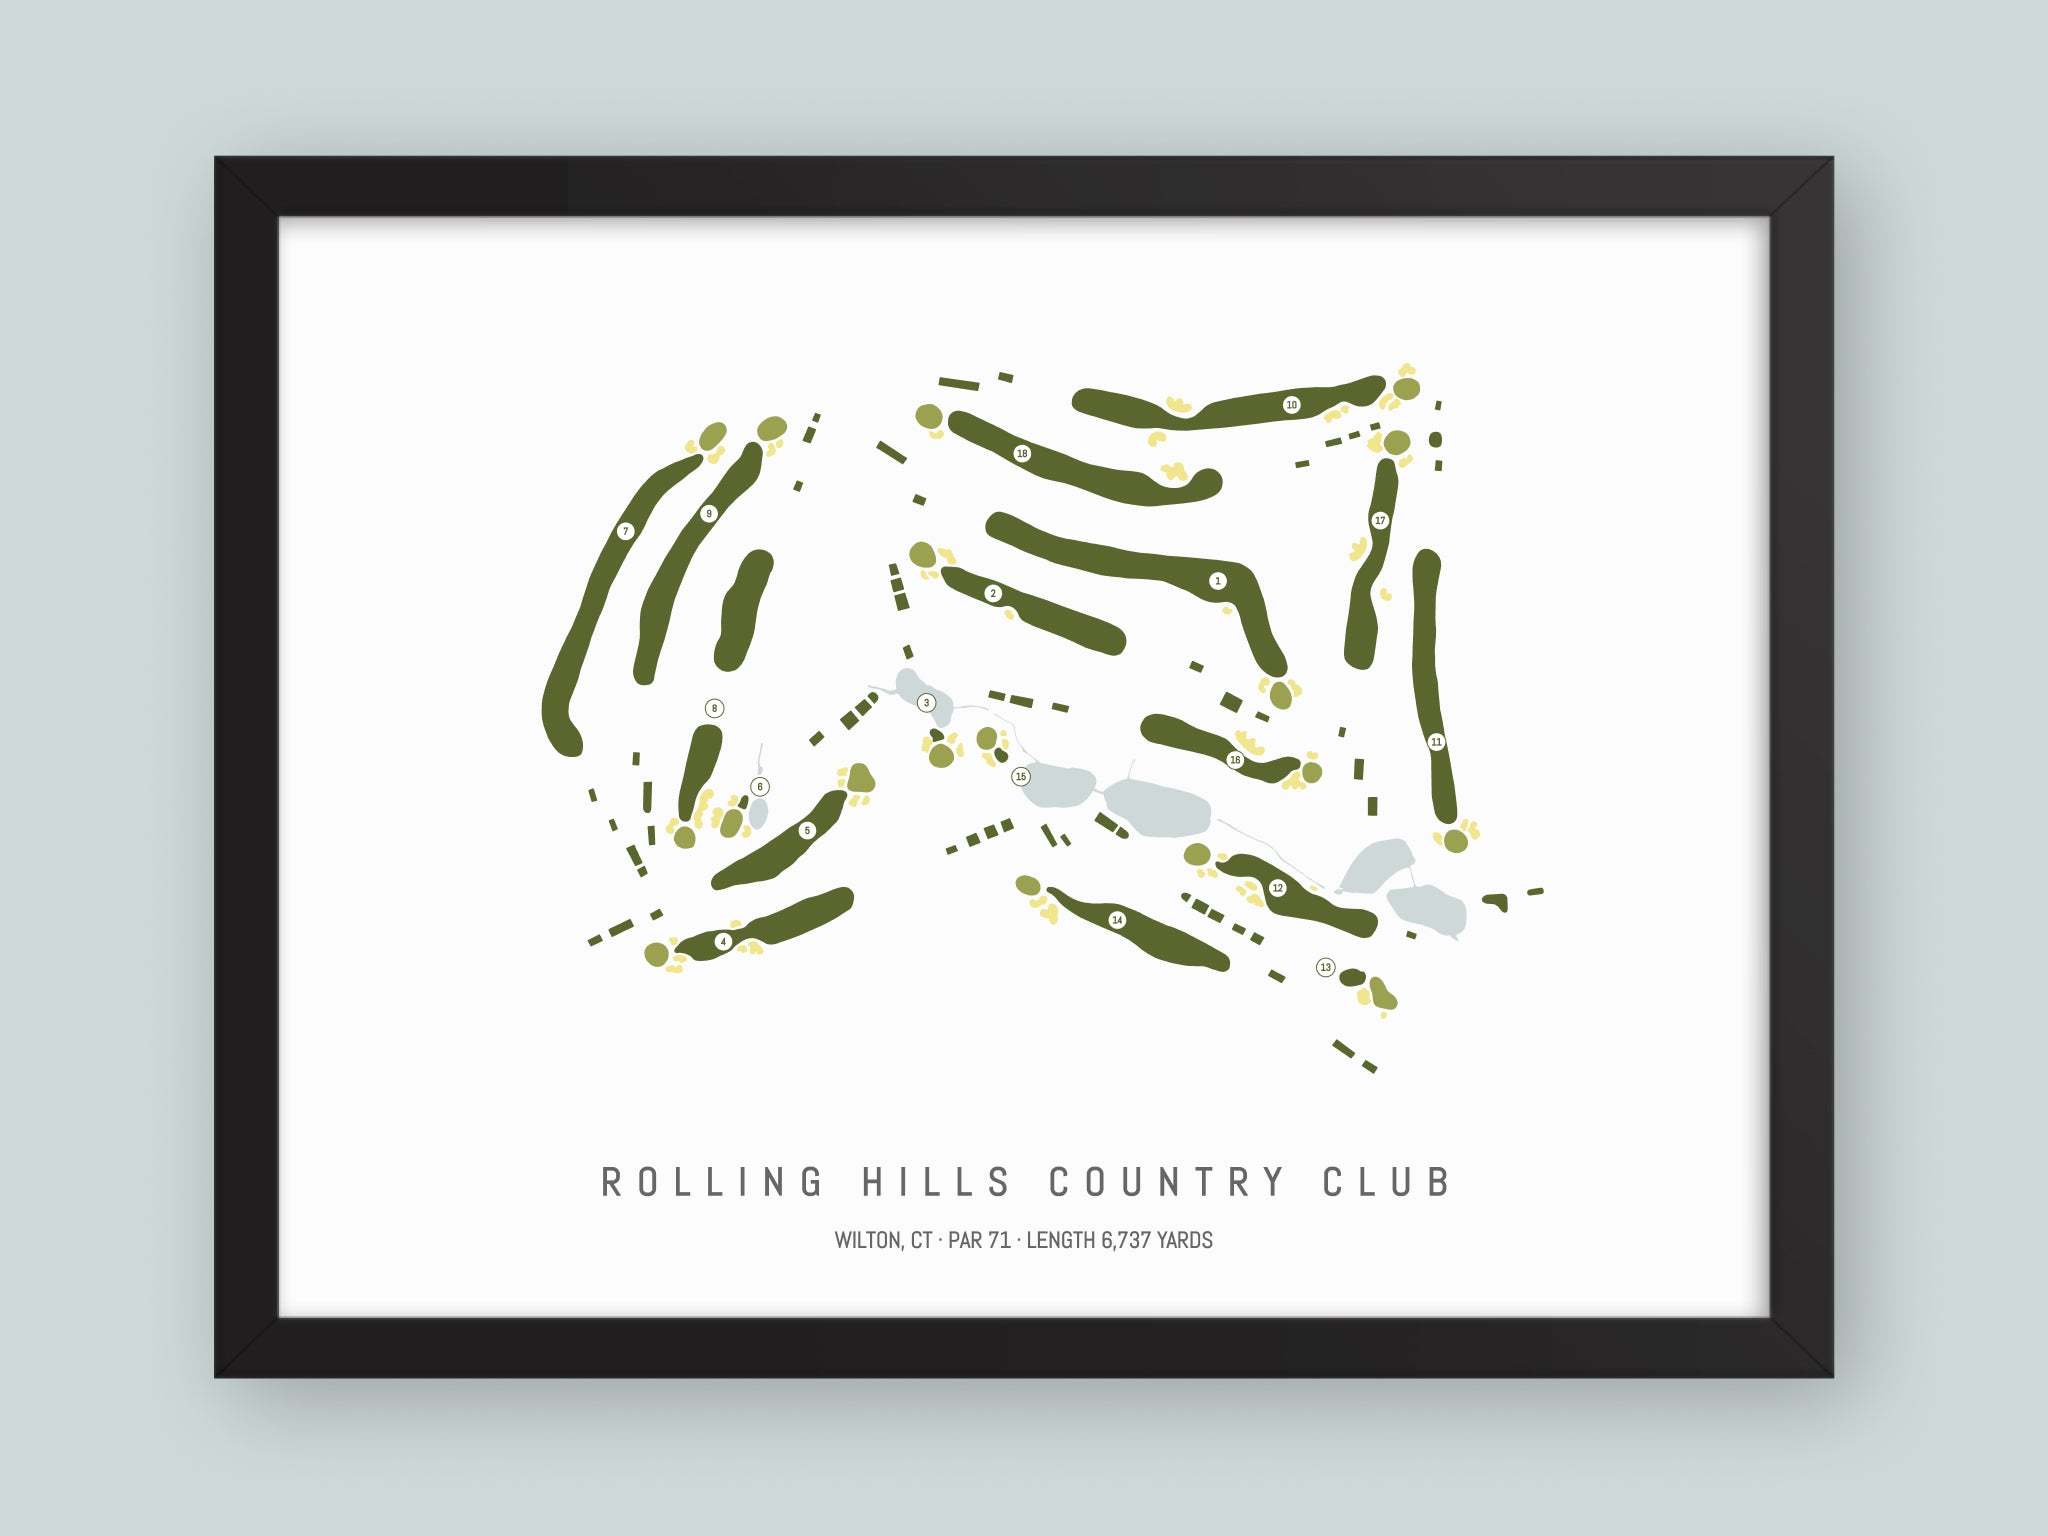 Rolling-Hills-Country-Club-CT--Black-Frame-24x18-With-Hole-Numbers